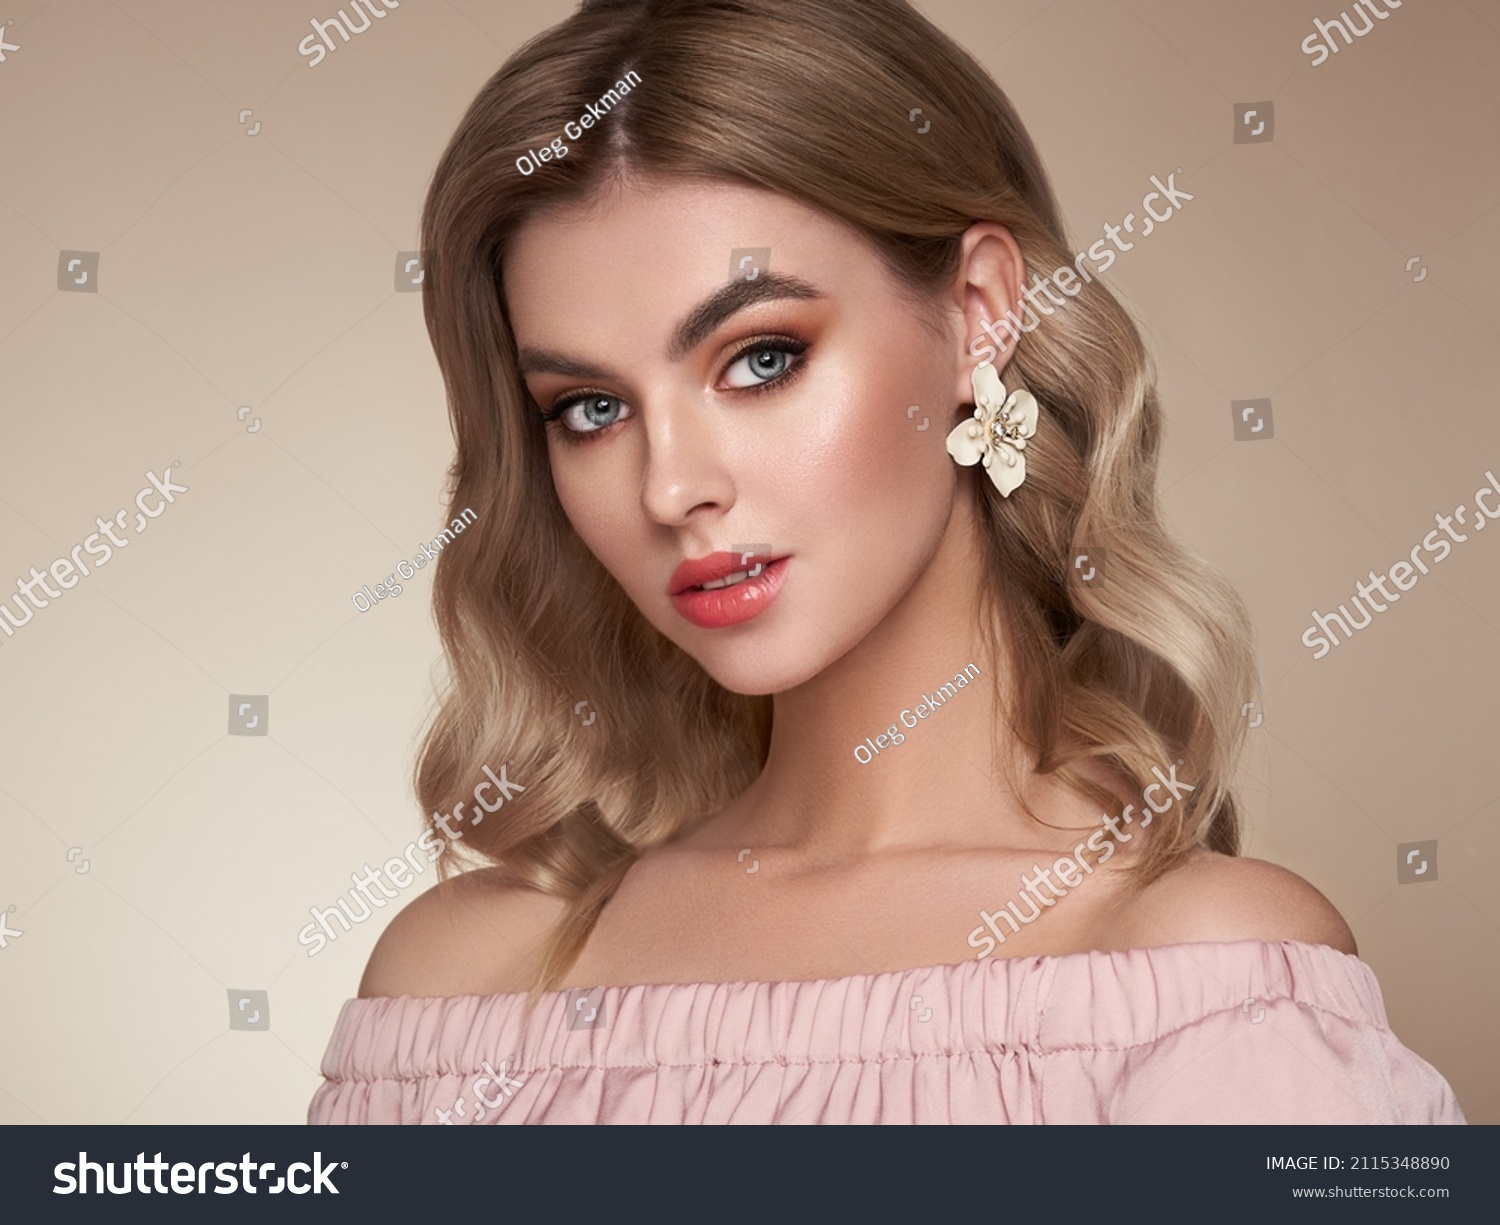 3. Wavy Blonde Hair Girl High Resolution Stock Photography and Images - Alamy - wide 11